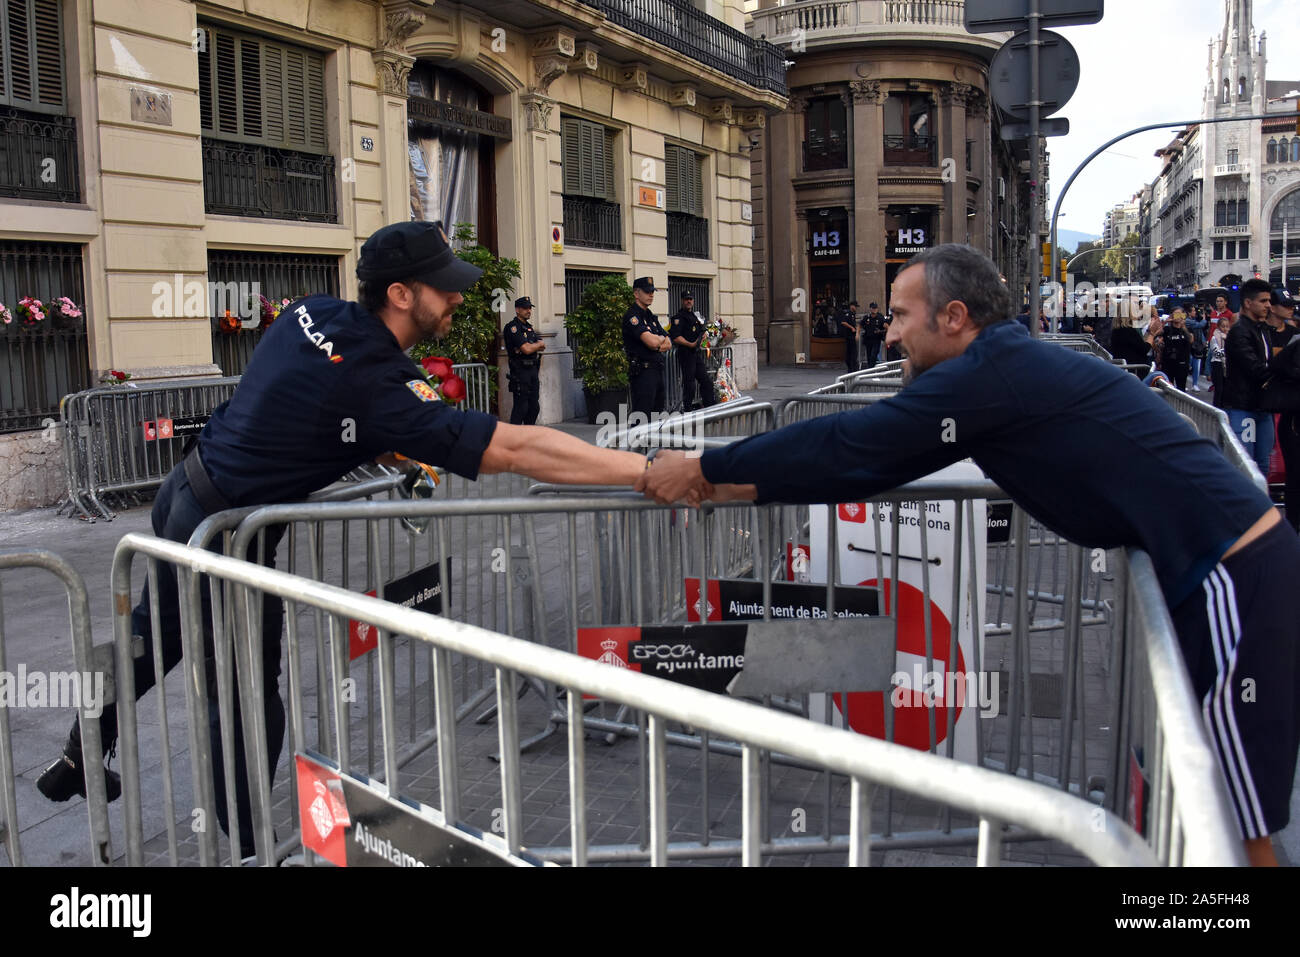 A man shakes hands with a police officer in front of the headquarters of the Spanish police.Several citizens of Barcelona approached the headquarters of the Spanish National Police and offer food, flowers or say hello to them and chant, this is our police 'thanks to the effort they are making to control the demonstrations for the sentence to the political prisoners for the October 1, 2017 referendum. Stock Photo